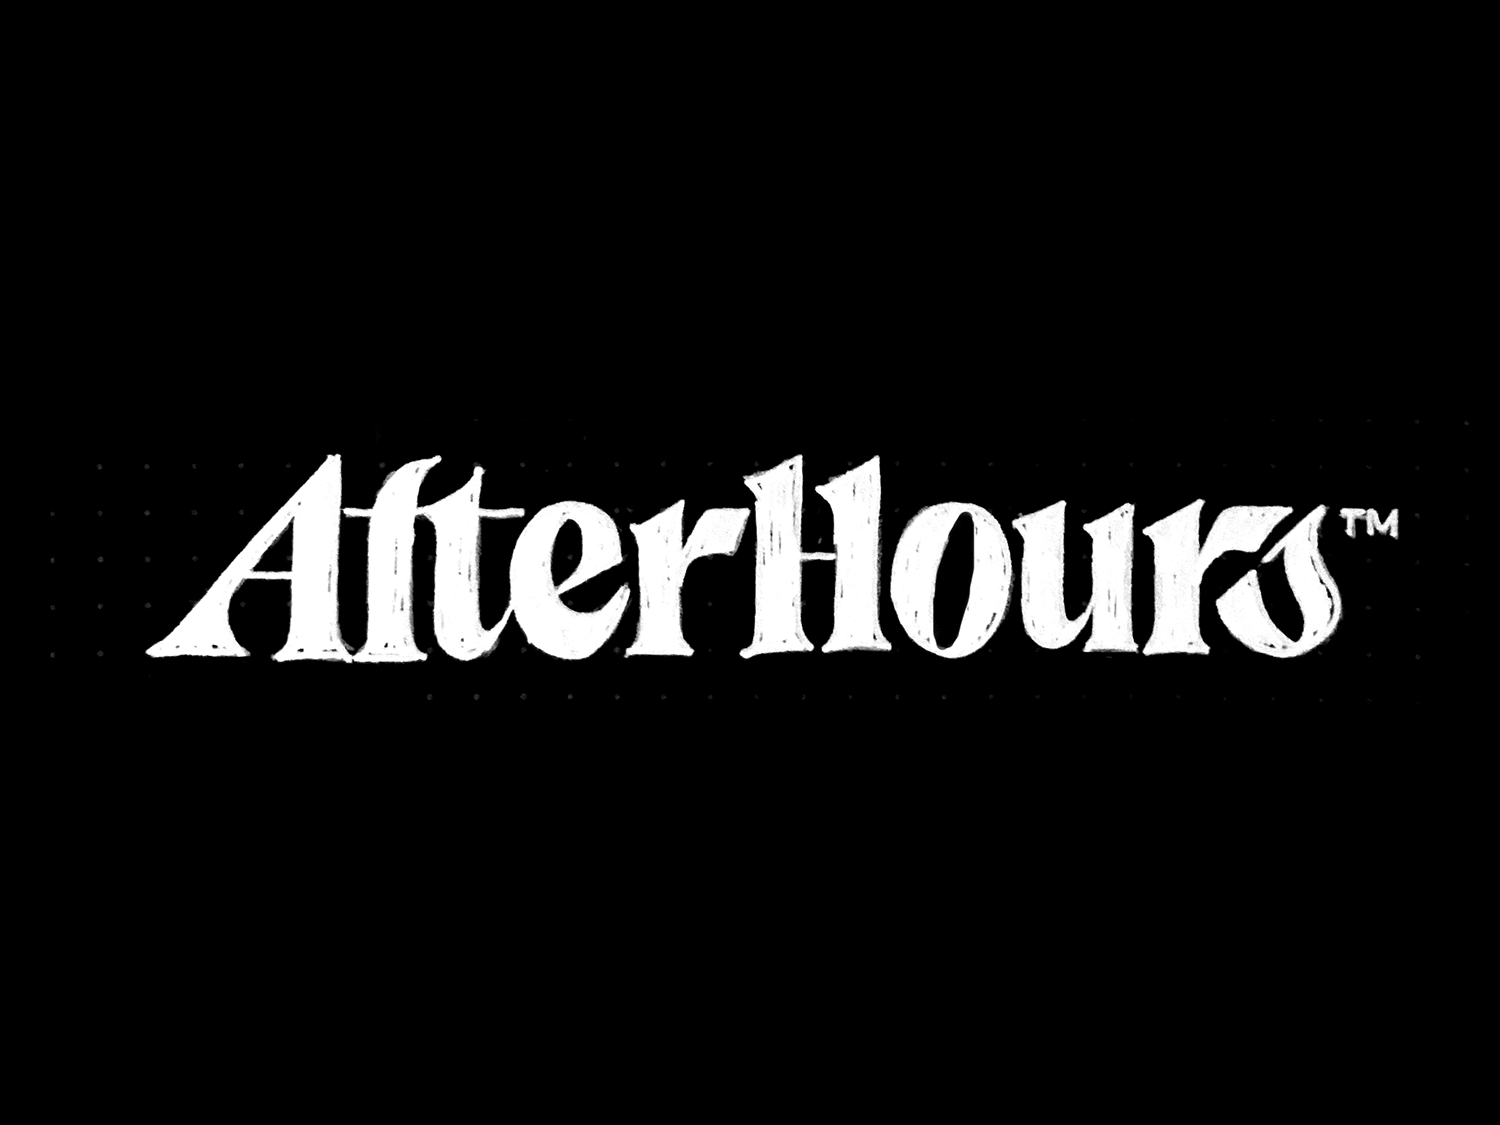 After:Hours by Viet Huynh